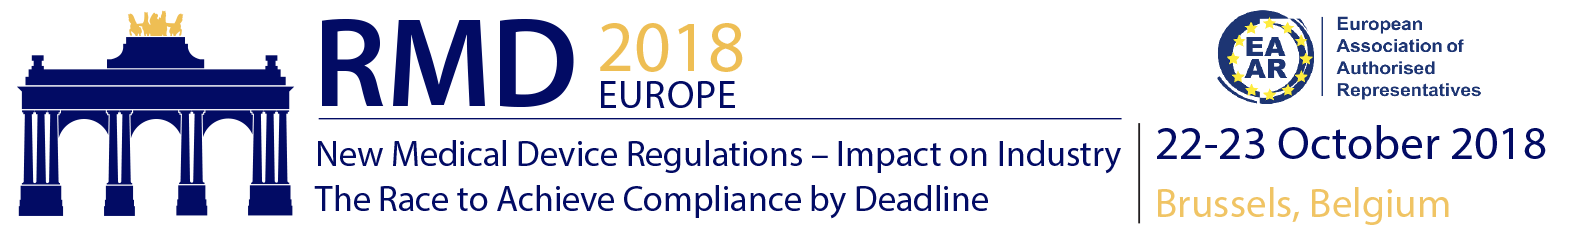 The 3rd European Symposium on New Medical Device Regulations - Impact on Industry - The Race to Achieve Compliance by Deadline - (RMD2018) 